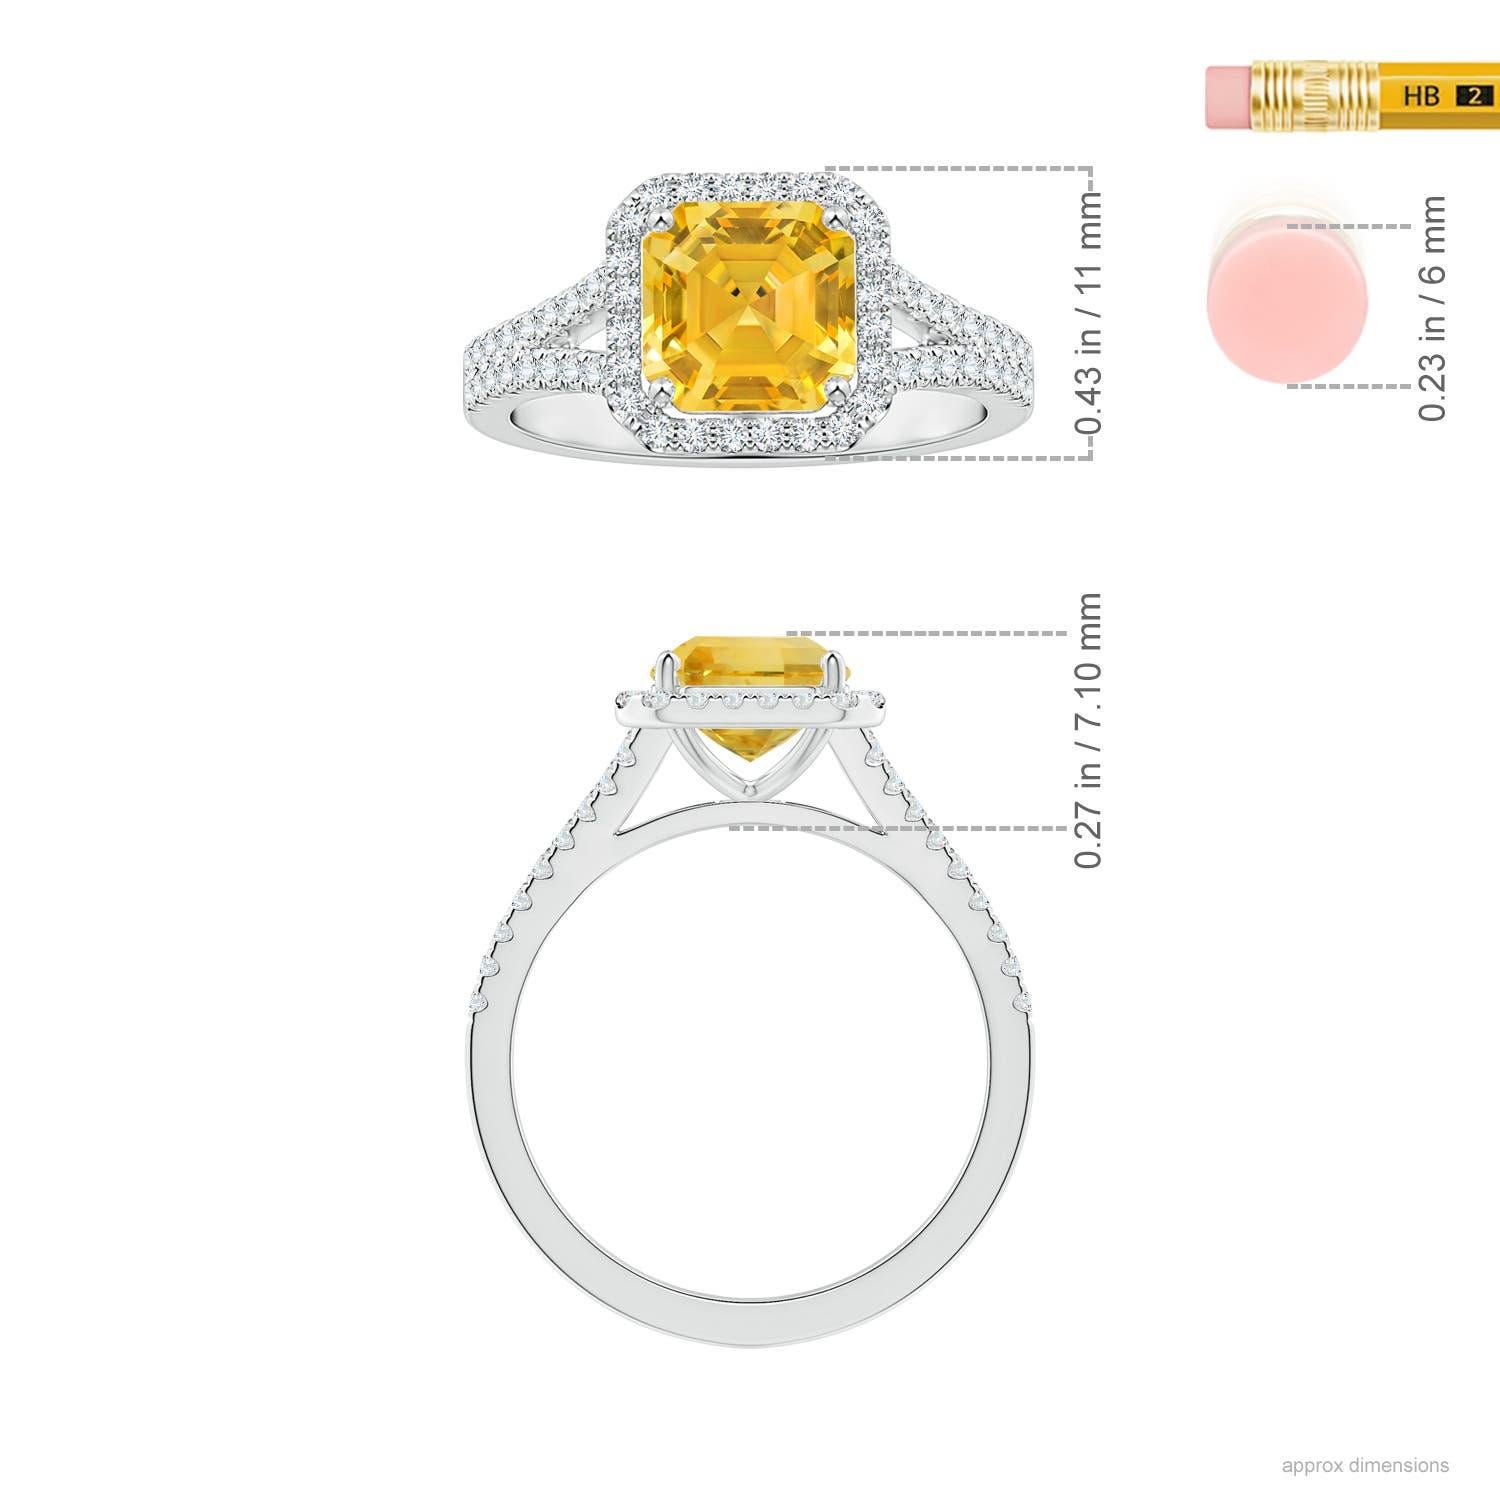 For Sale:  Angara GIA Certified Natural Emerald-Cut Yellow Sapphire Halo Ring in Platinum  5